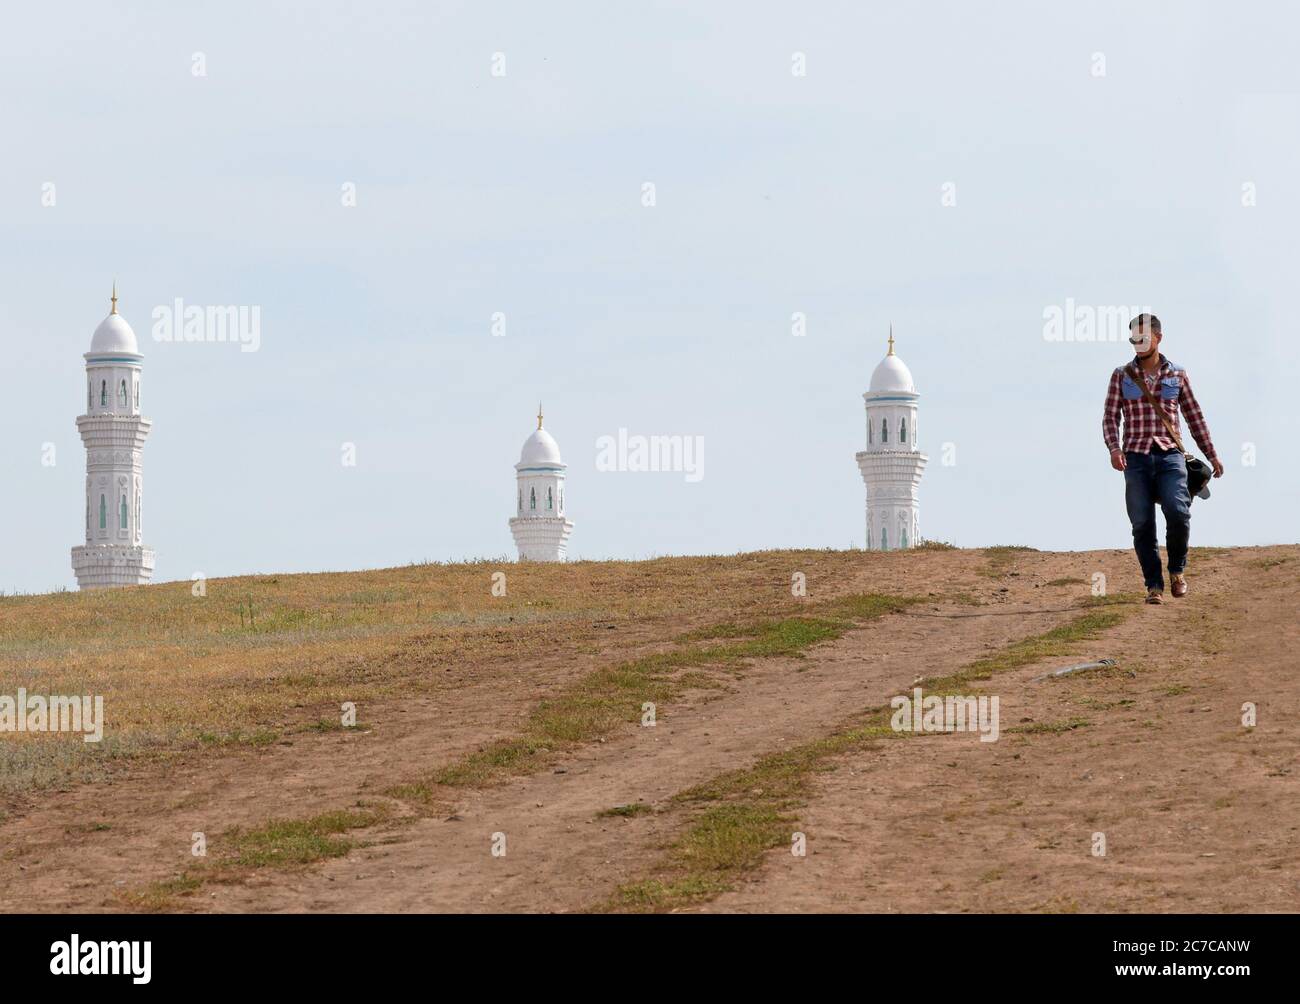 Man walking through Nur-Sultan, Kazakhstan, with minarets of a mosque in the background Stock Photo